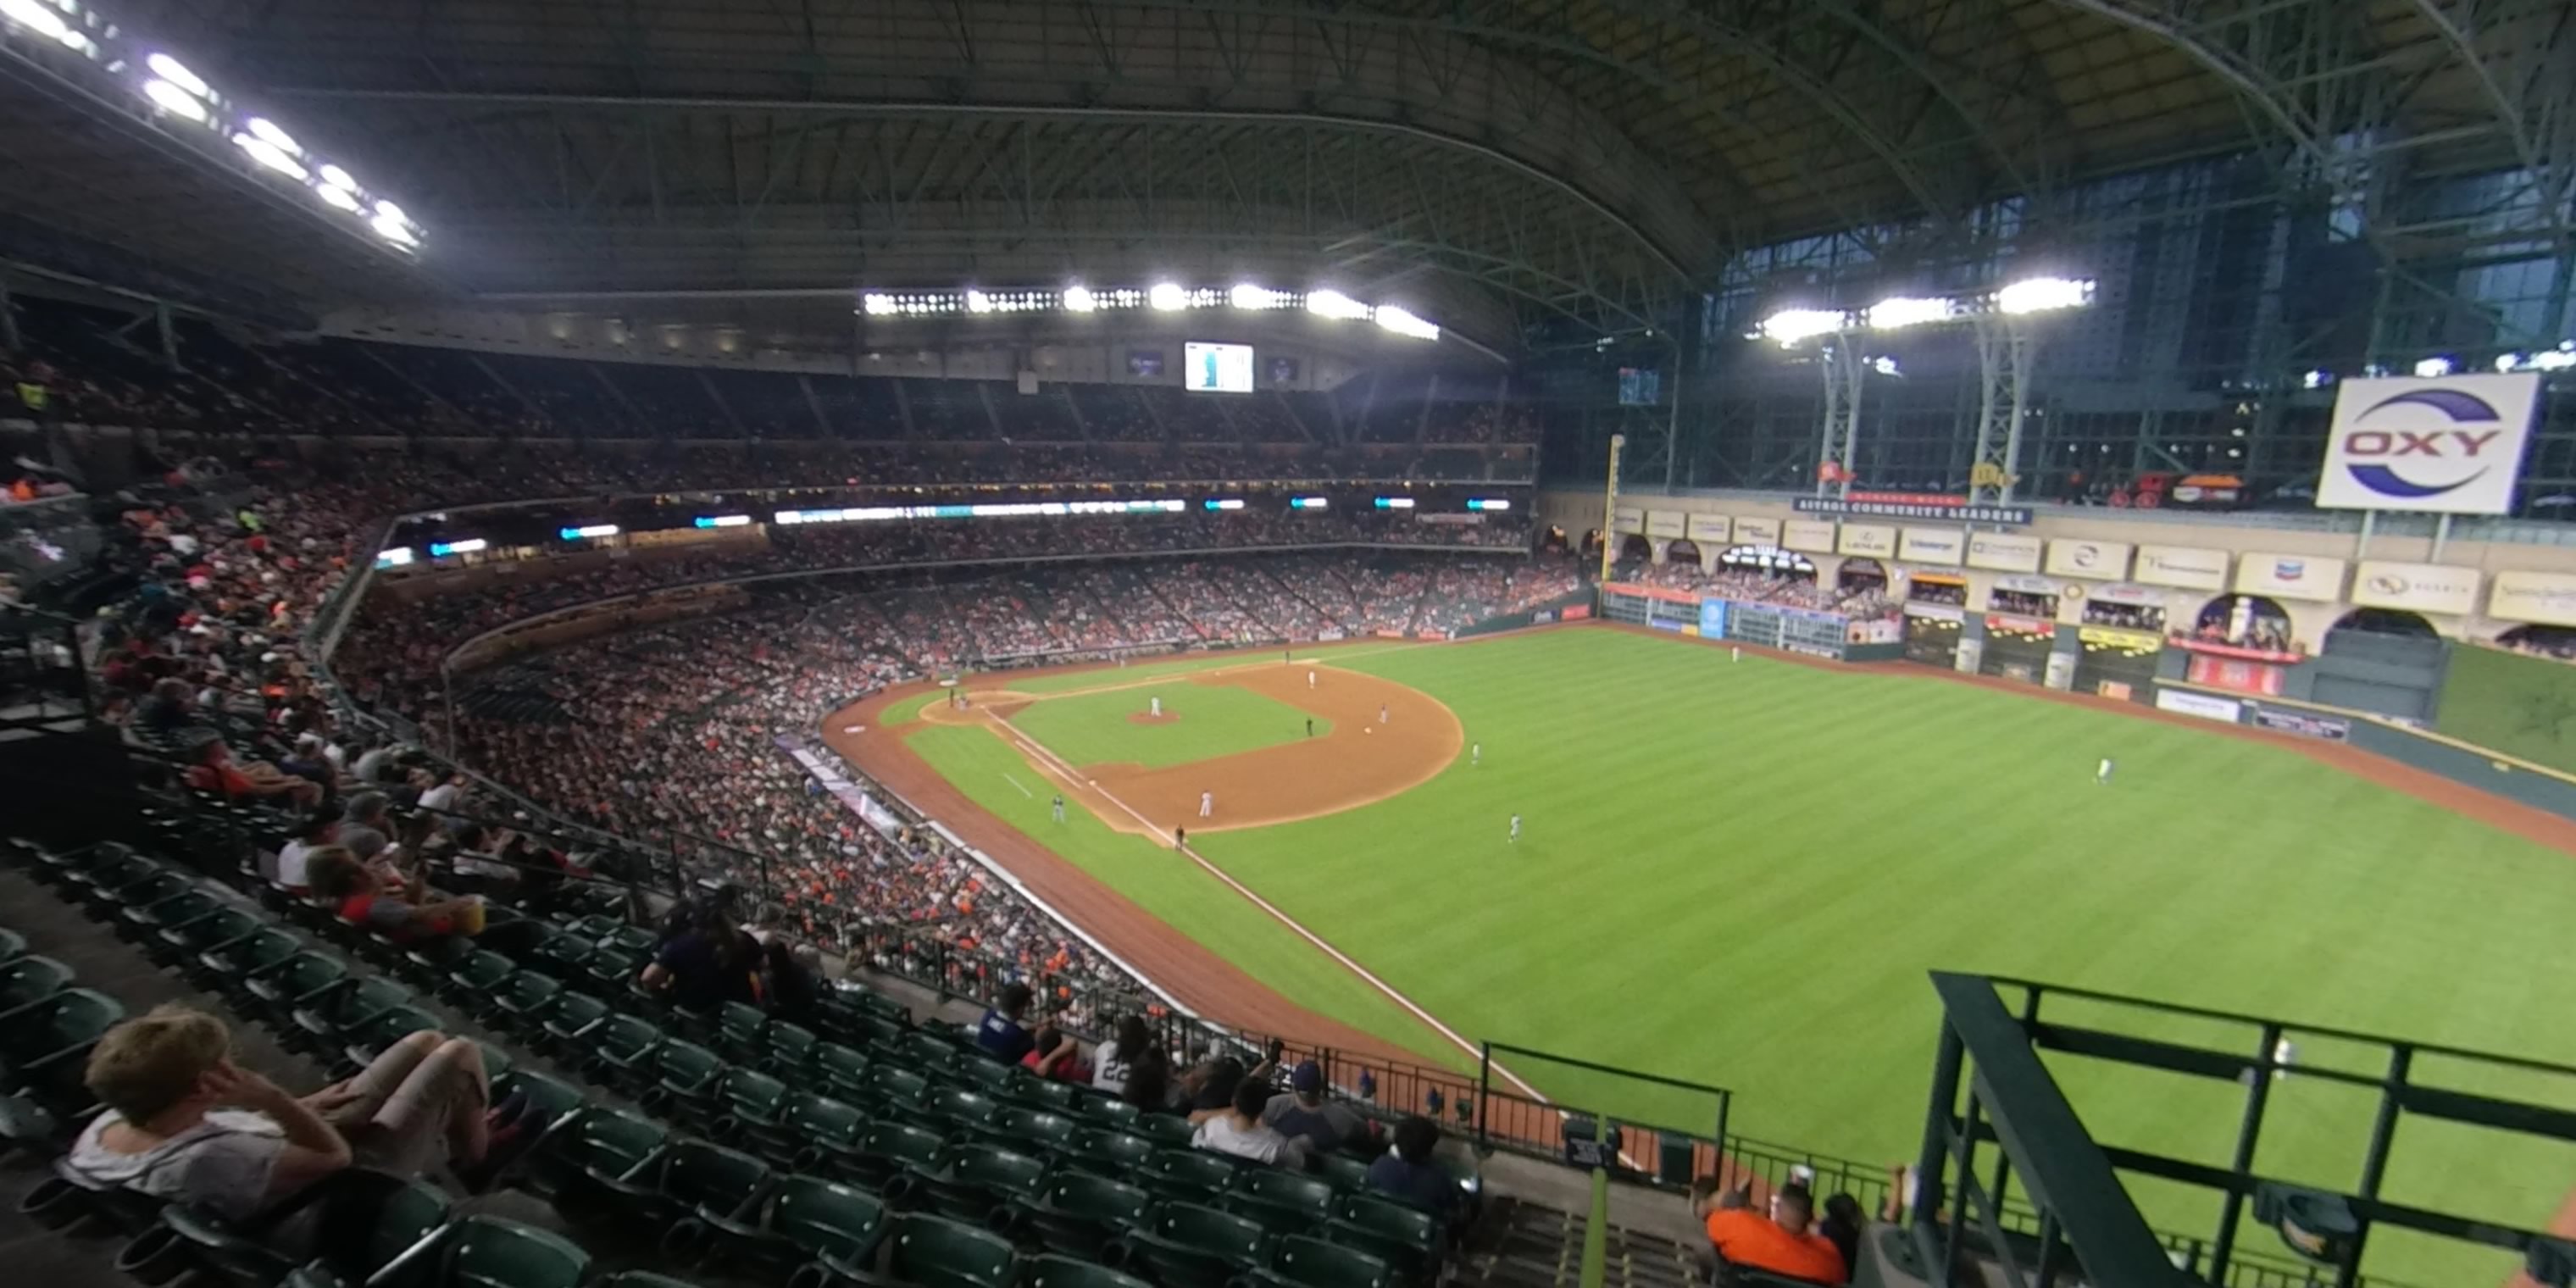 Section 317 at Minute Maid Park 